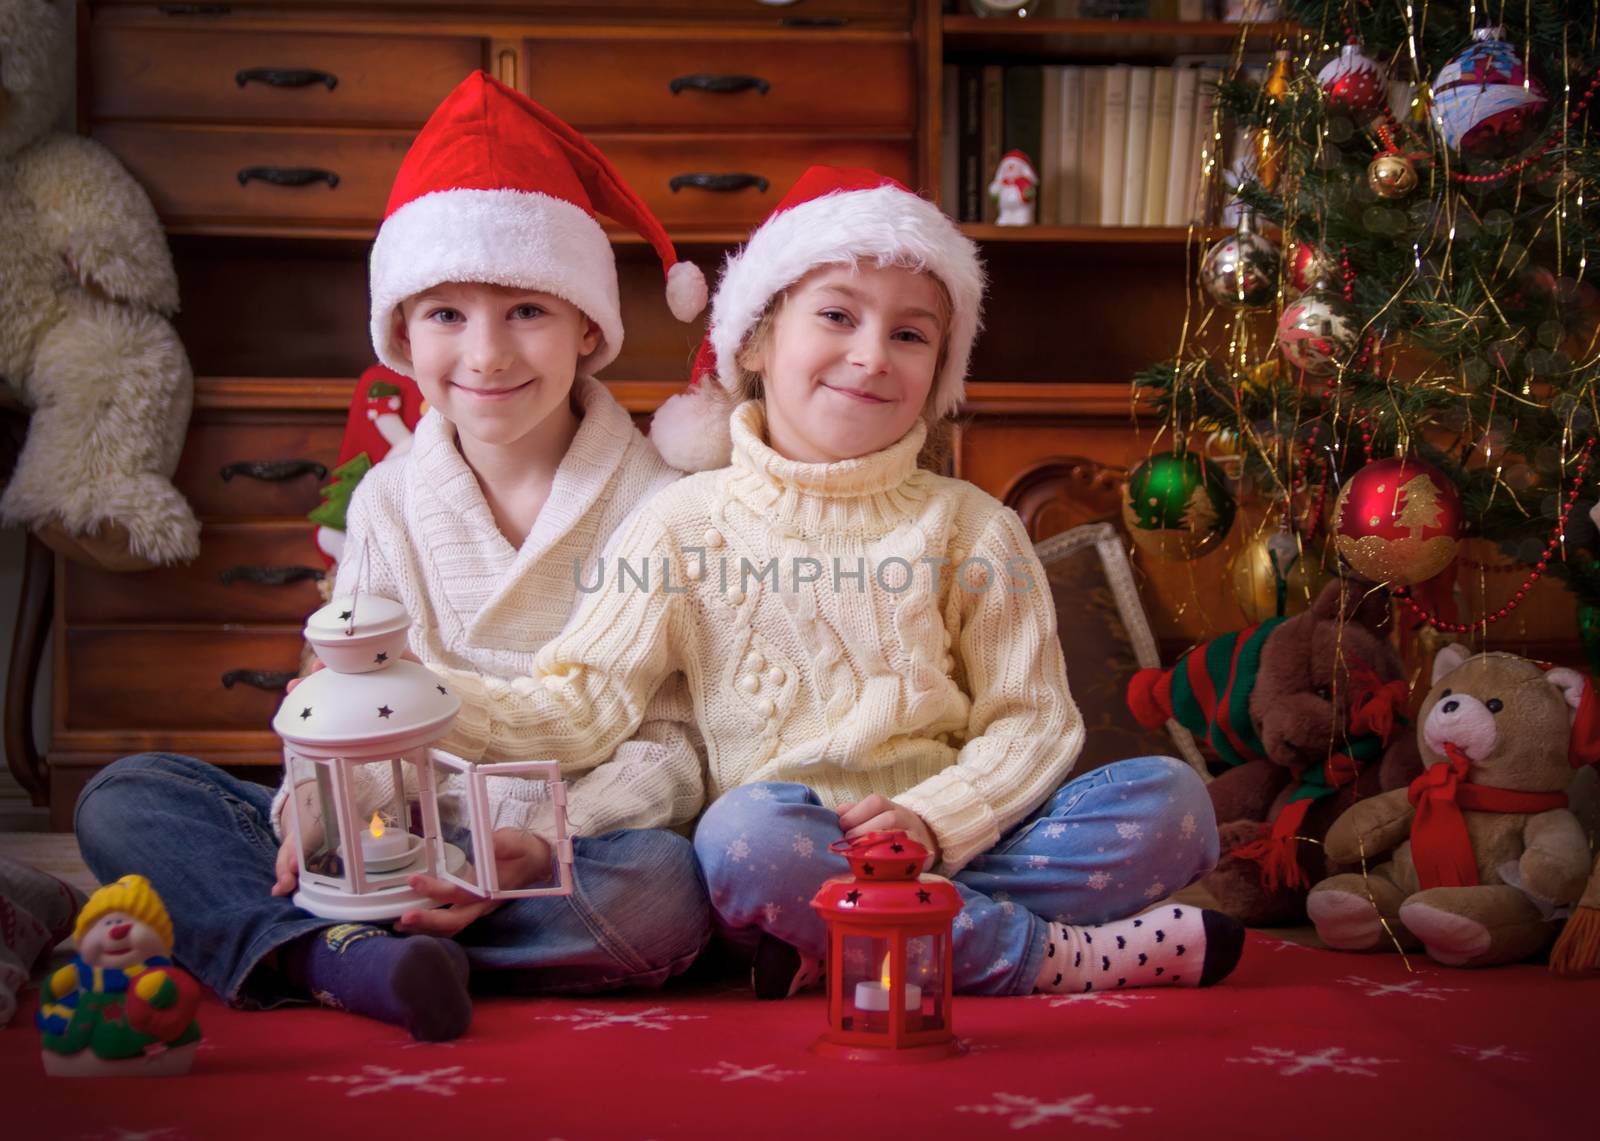 Two smiling kids playing with lanterns under Christmas tree